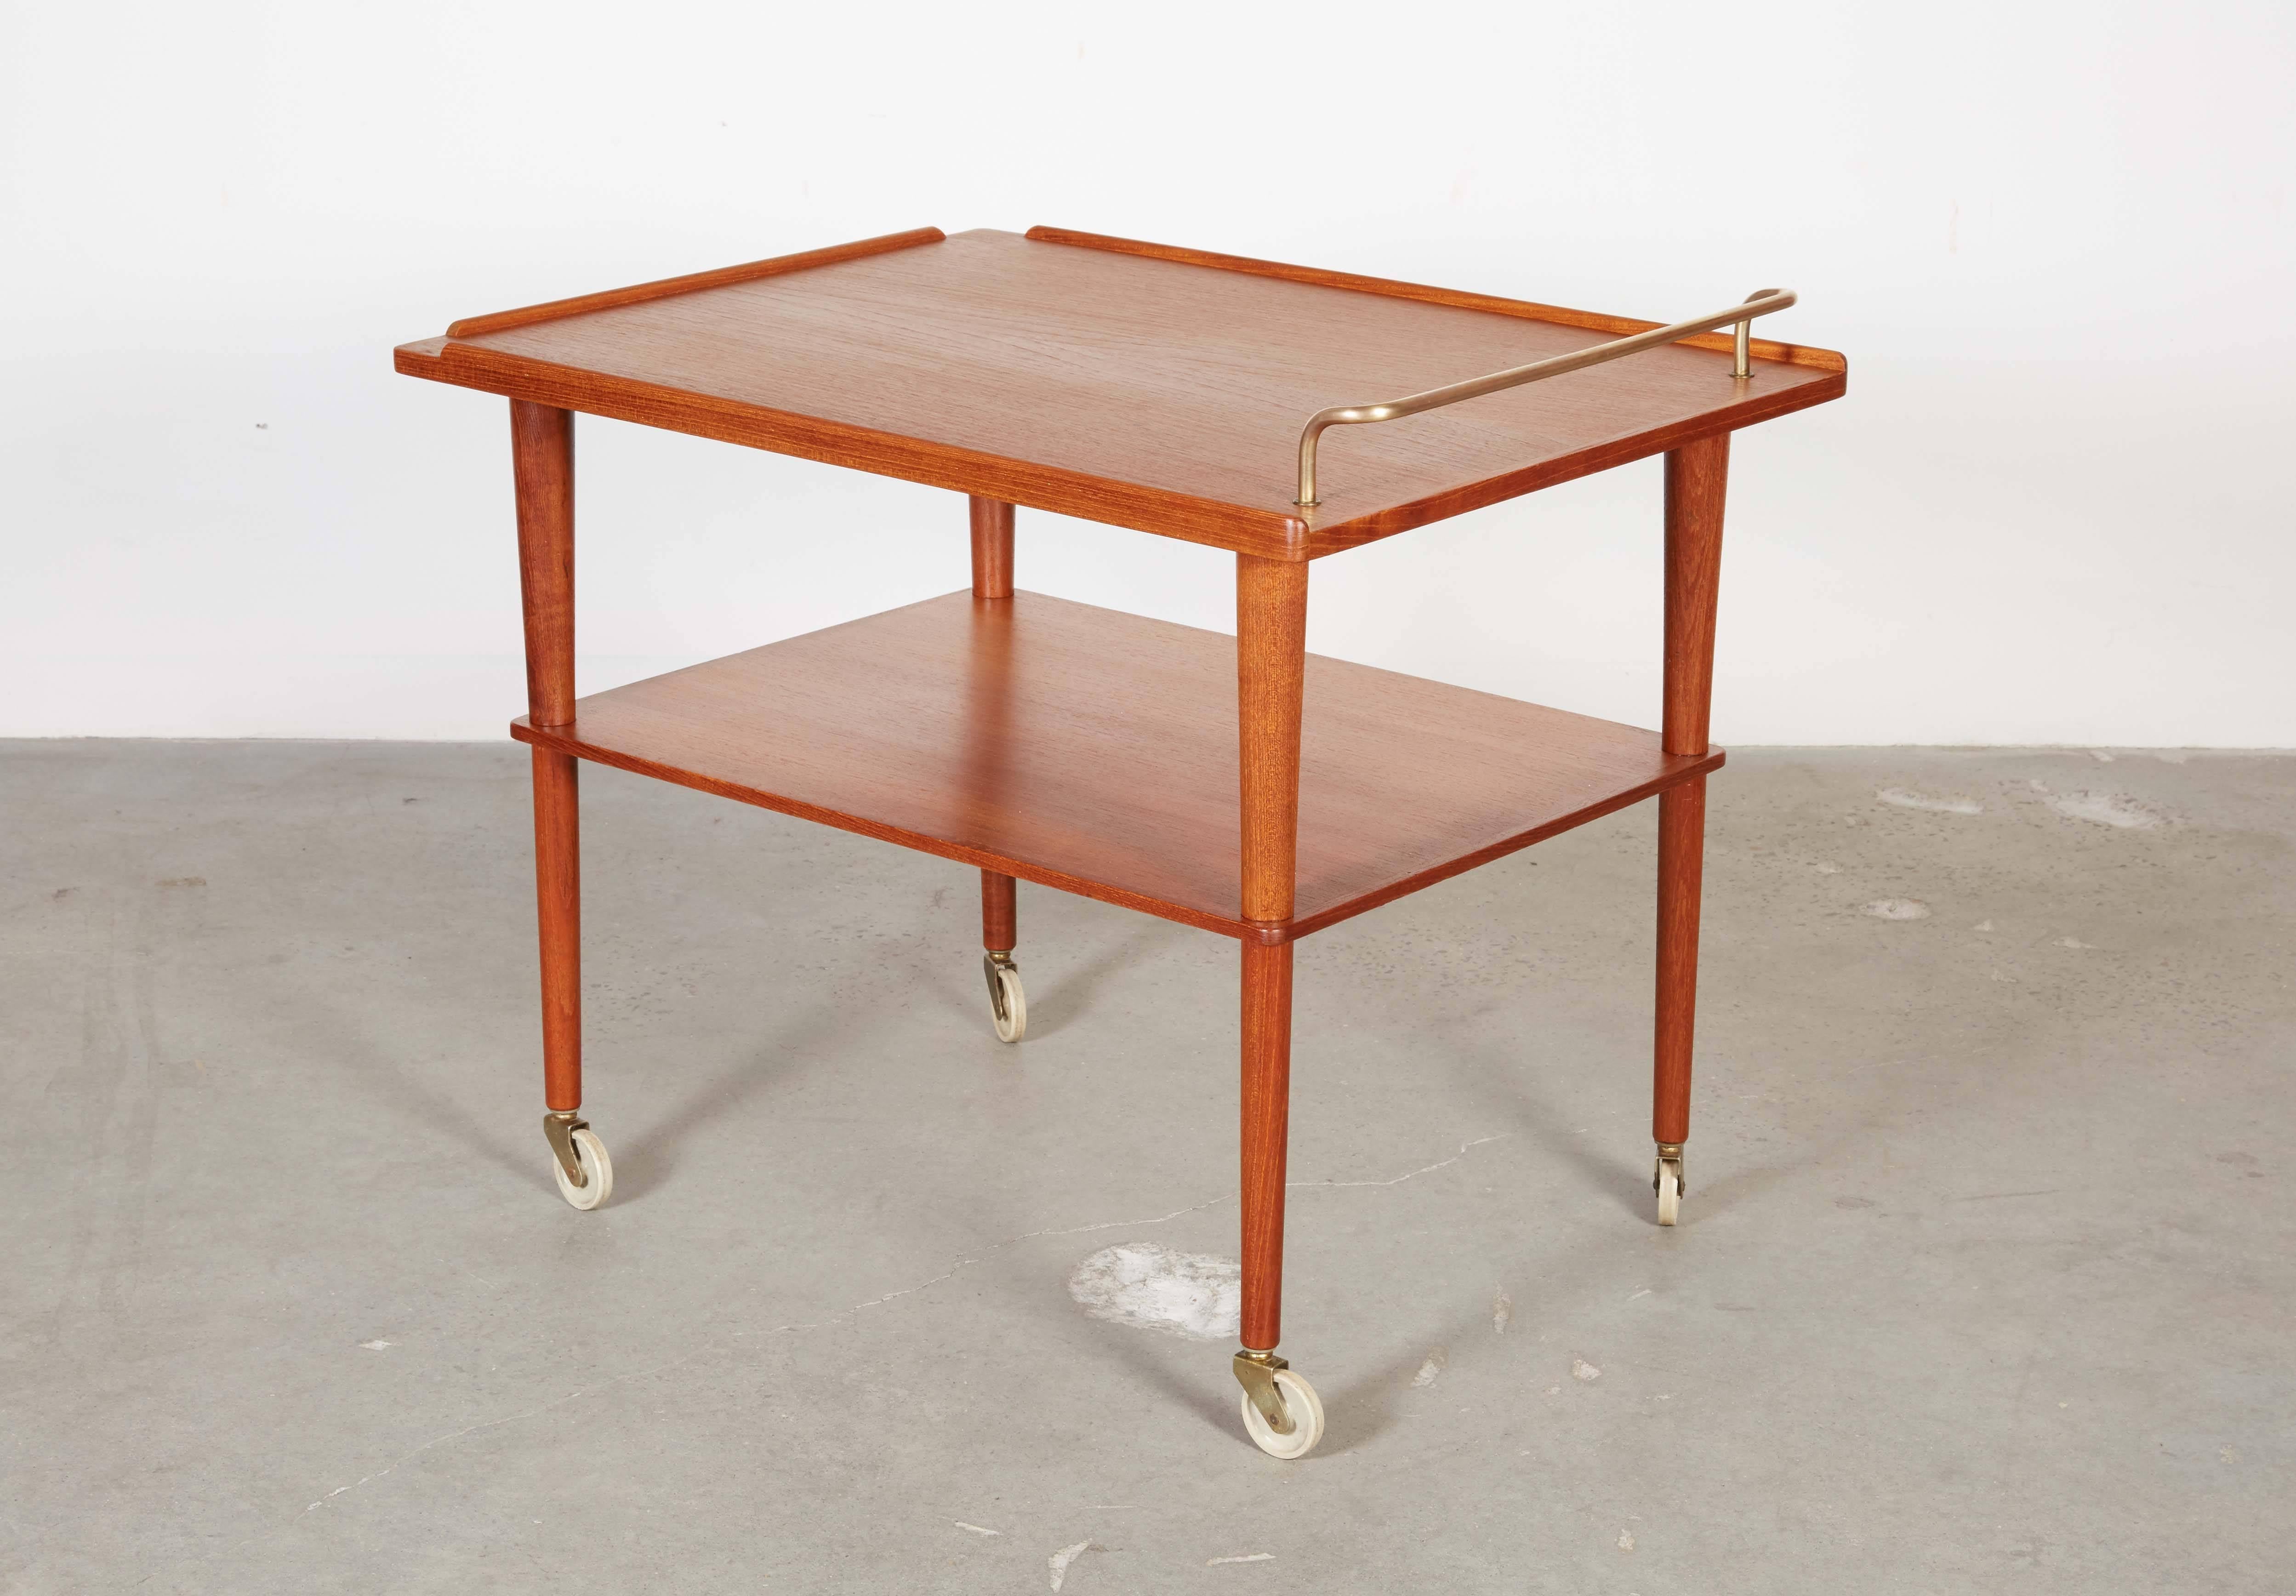 Vinage 1960s A. Hovman Olsen Teak Bar Cart

This Danish Bar Cart is in excellent condition. Liquor access is great in any room. Just wheel is over. Ready for pick up, delivery, or shipping anywhere in the world. 